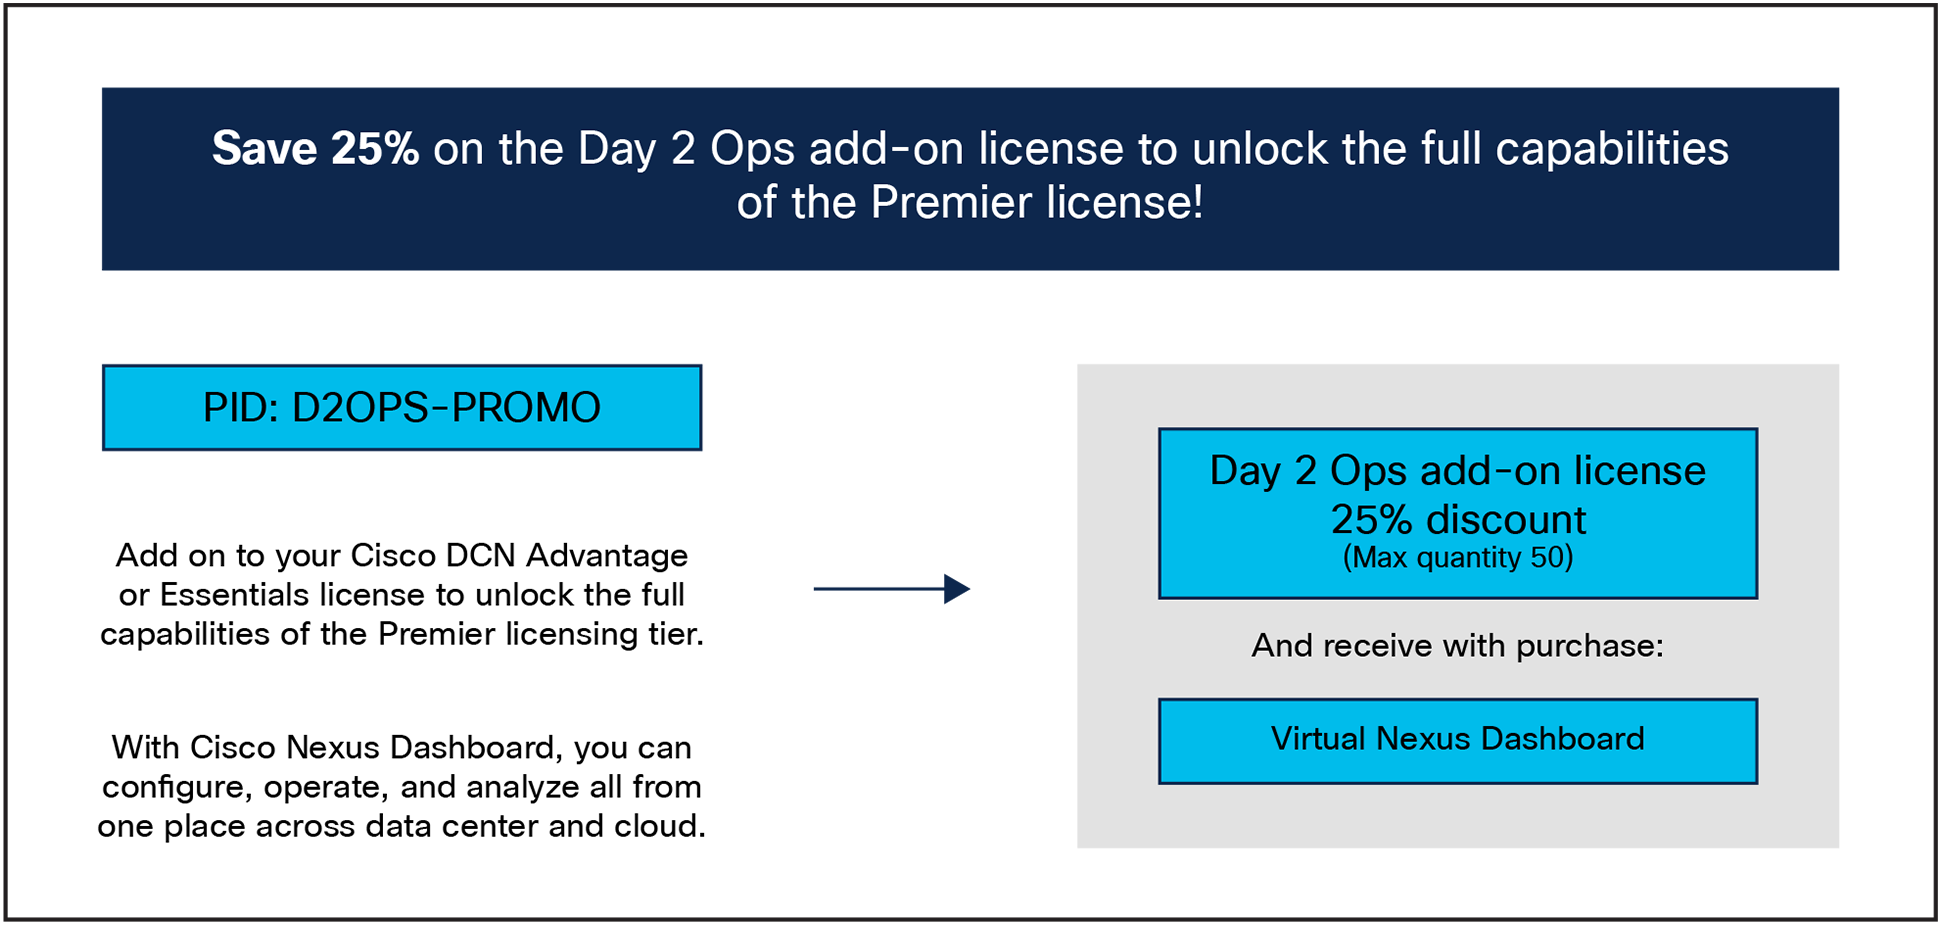 Cisco Data Center Networking (DCN) Day 2 Ops add-on license offer